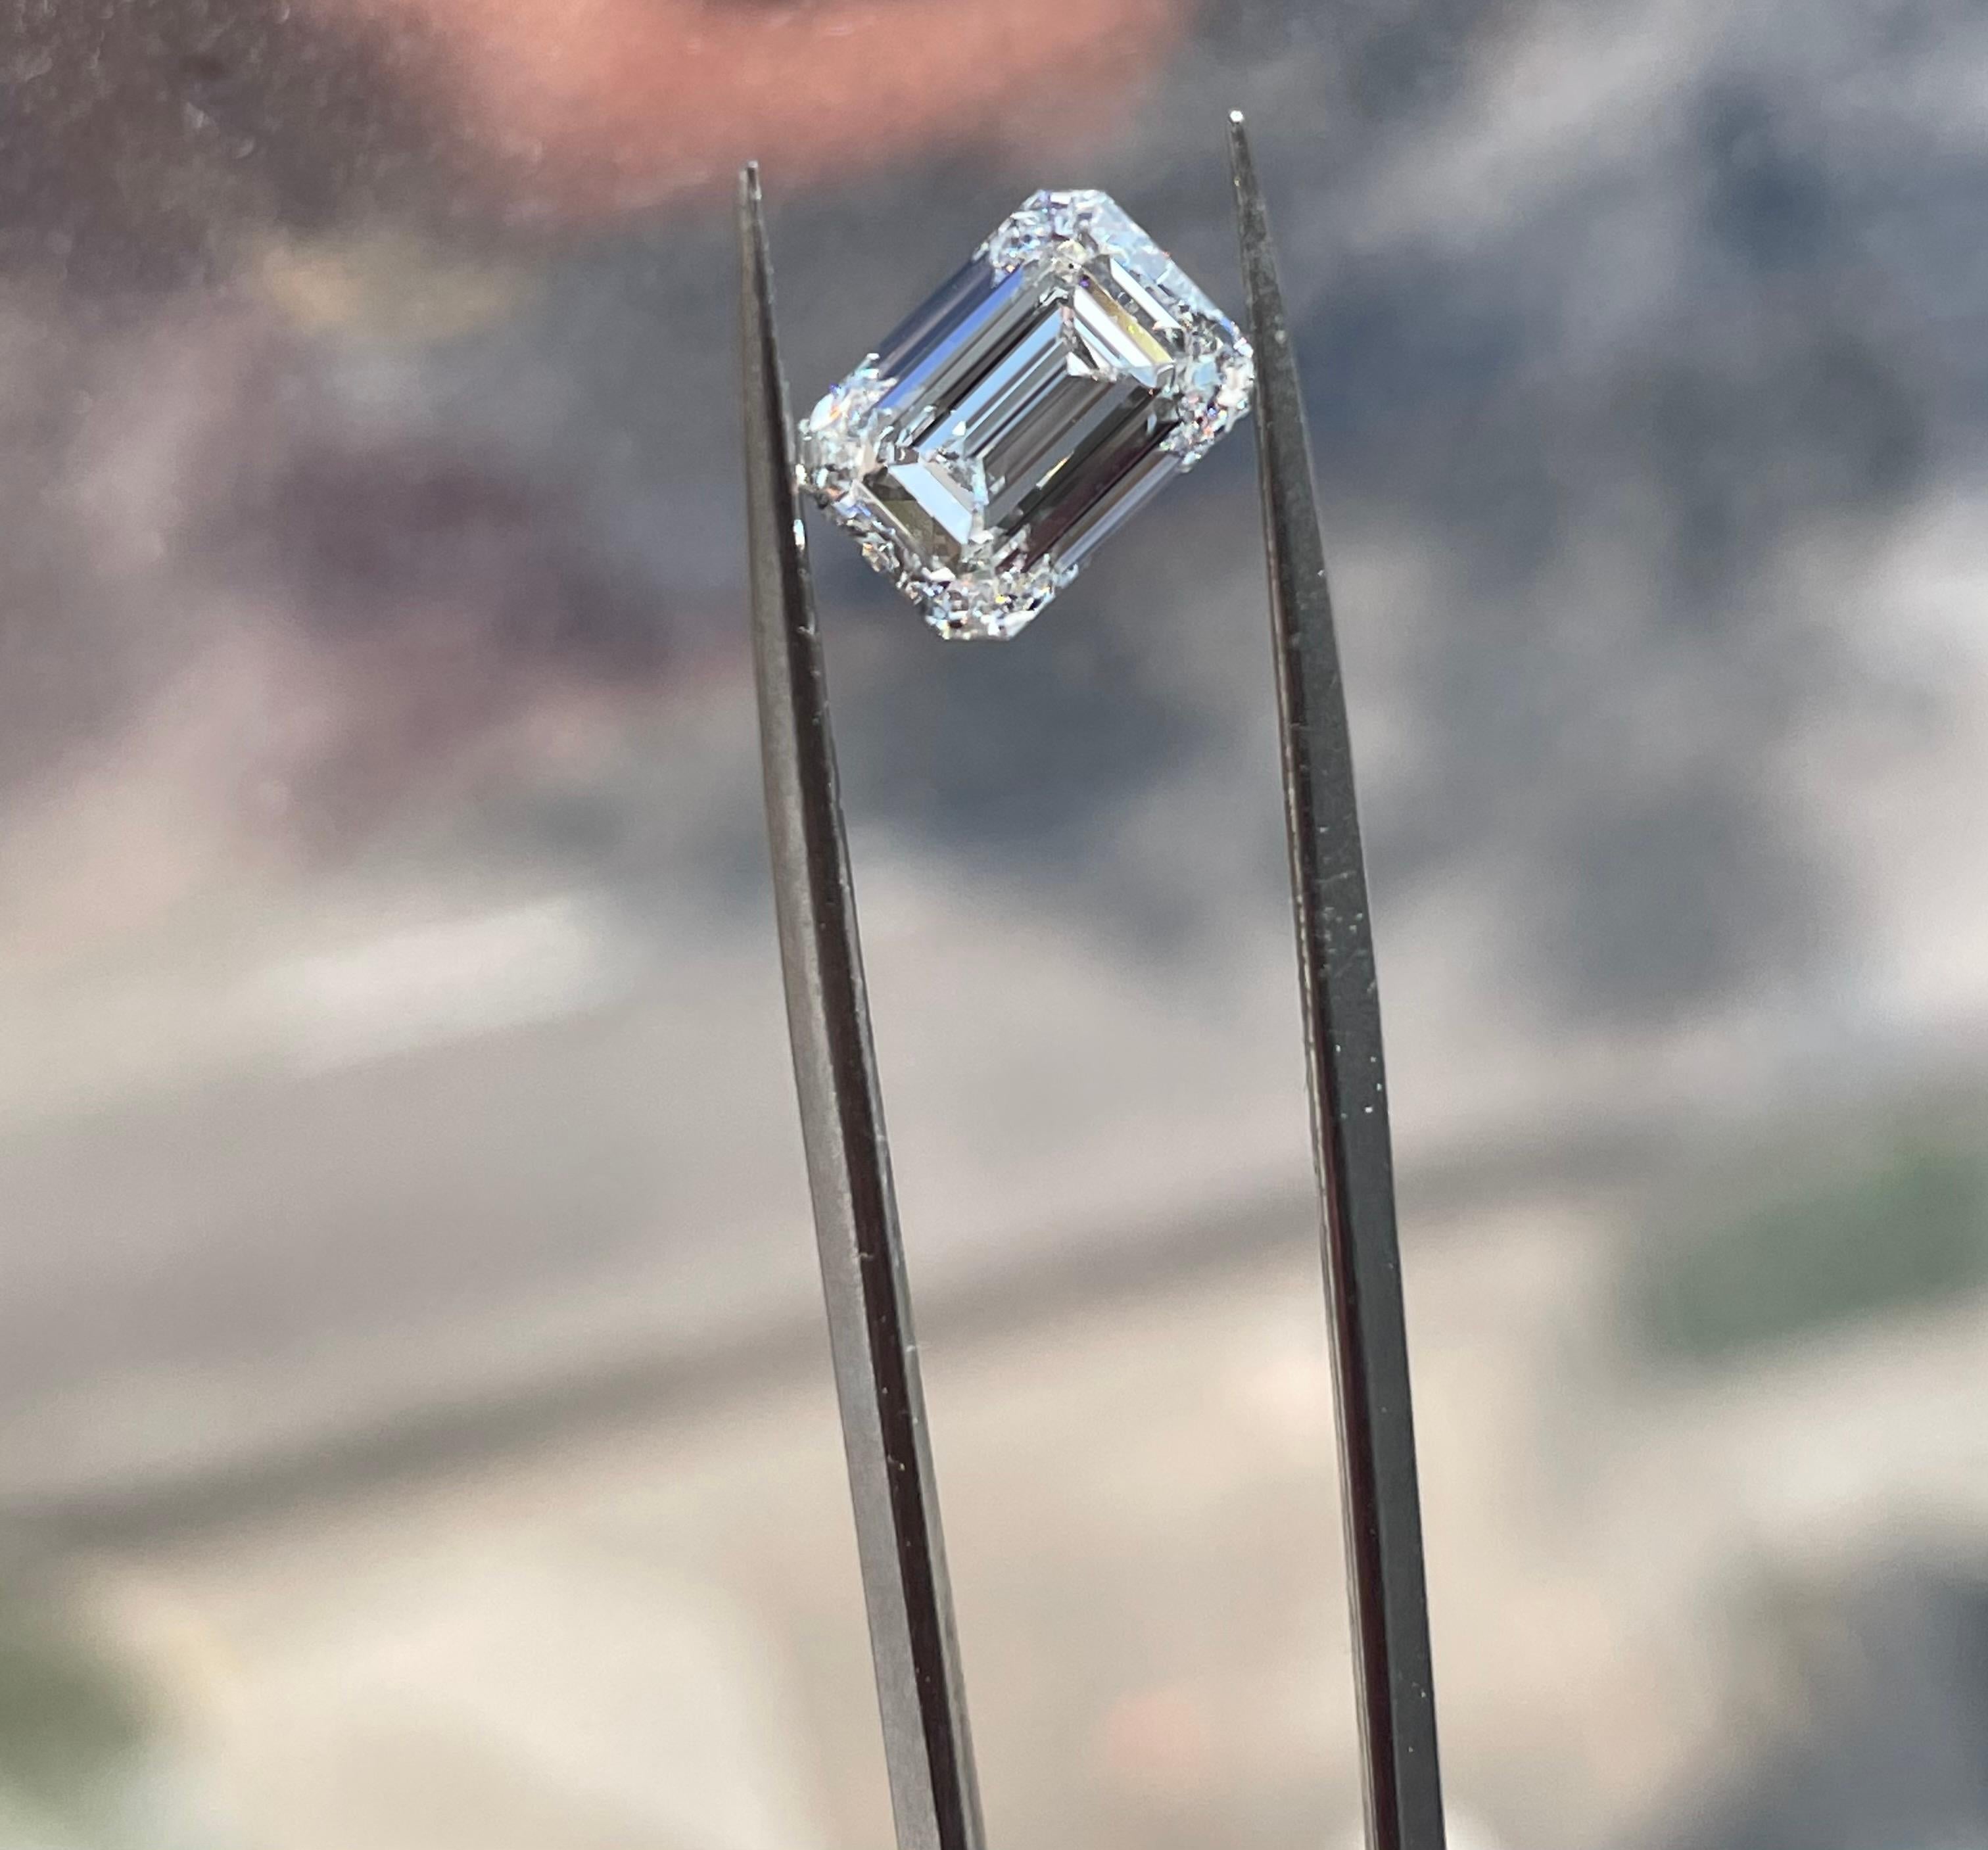 An incredible 2.01 ct Emerald Cut loose diamond. This diamond is gorgeous - white and bright! It is accompanied with the original GIA certification.